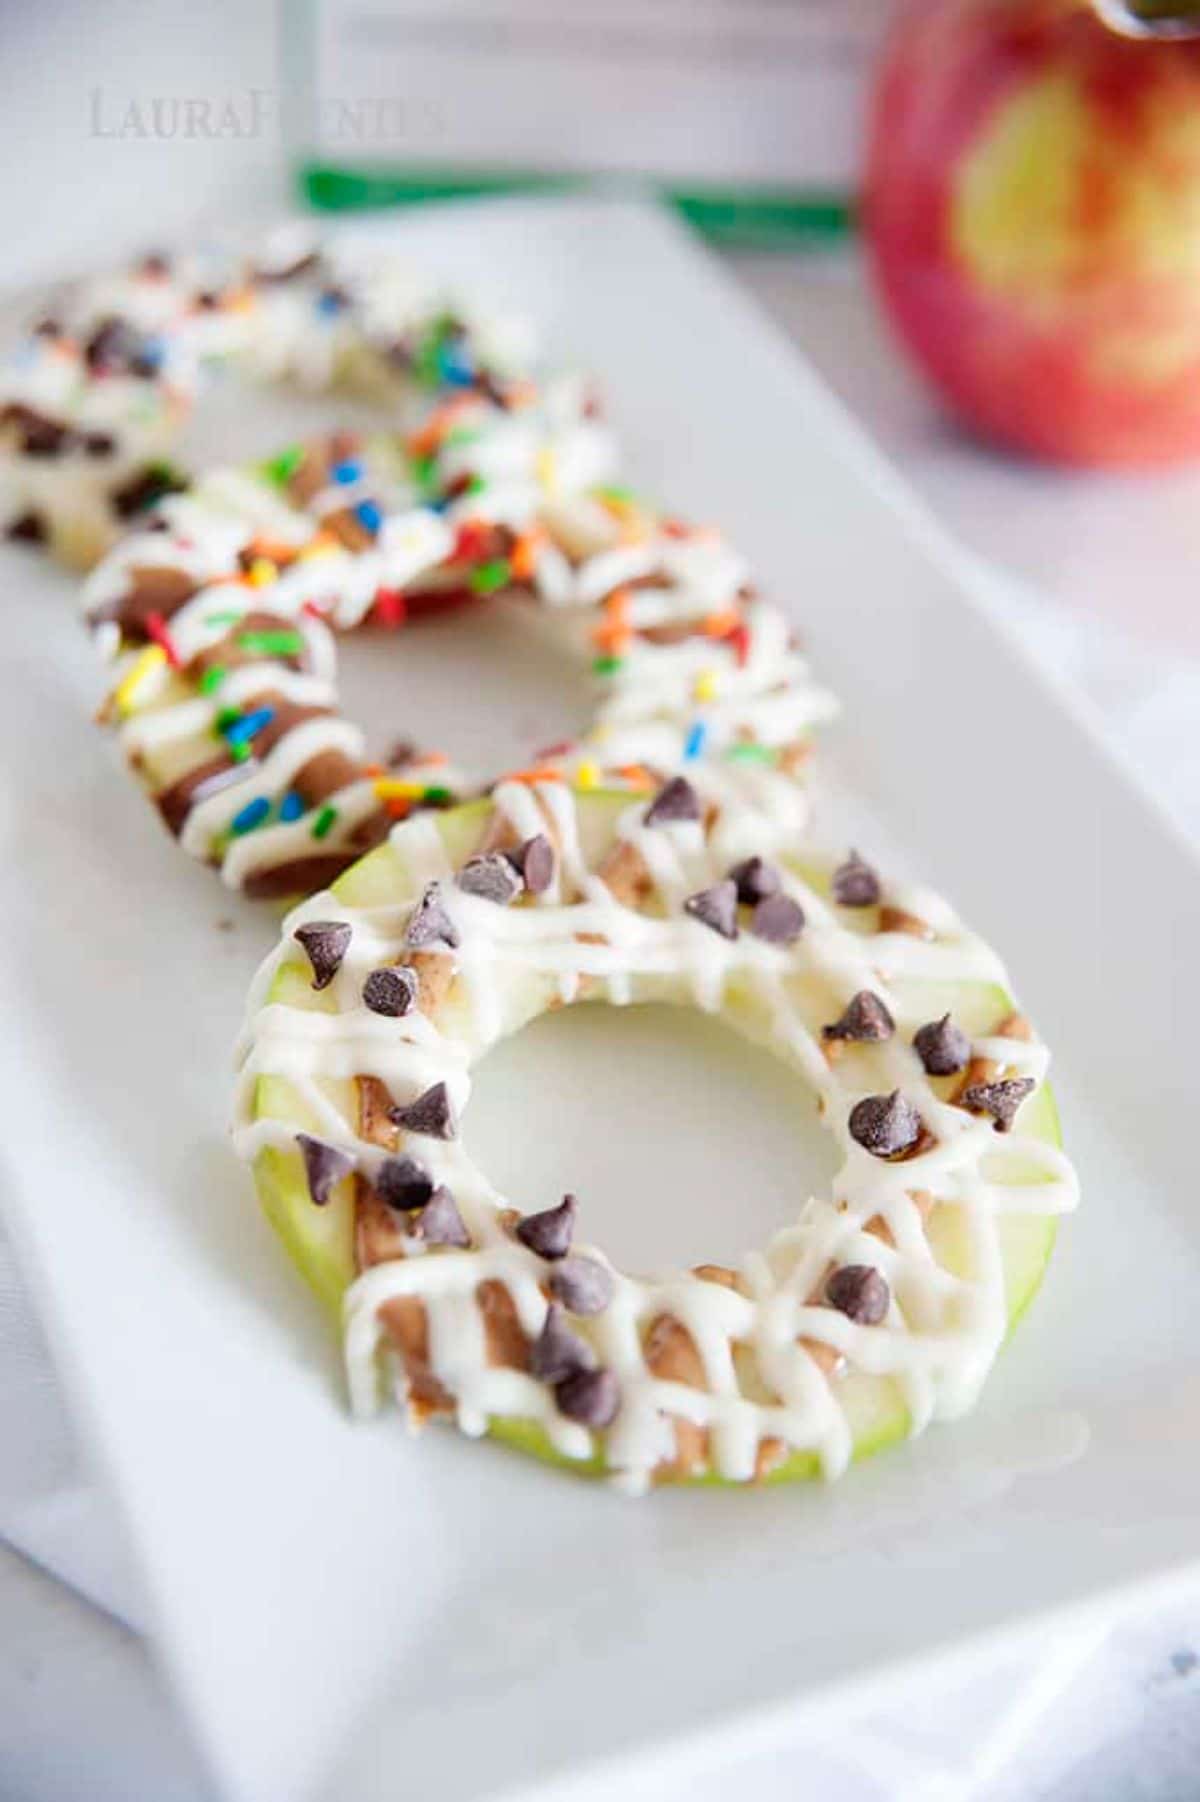 on a rectangular plate are 3 apple slices drizzled with chocolate and sprinkles